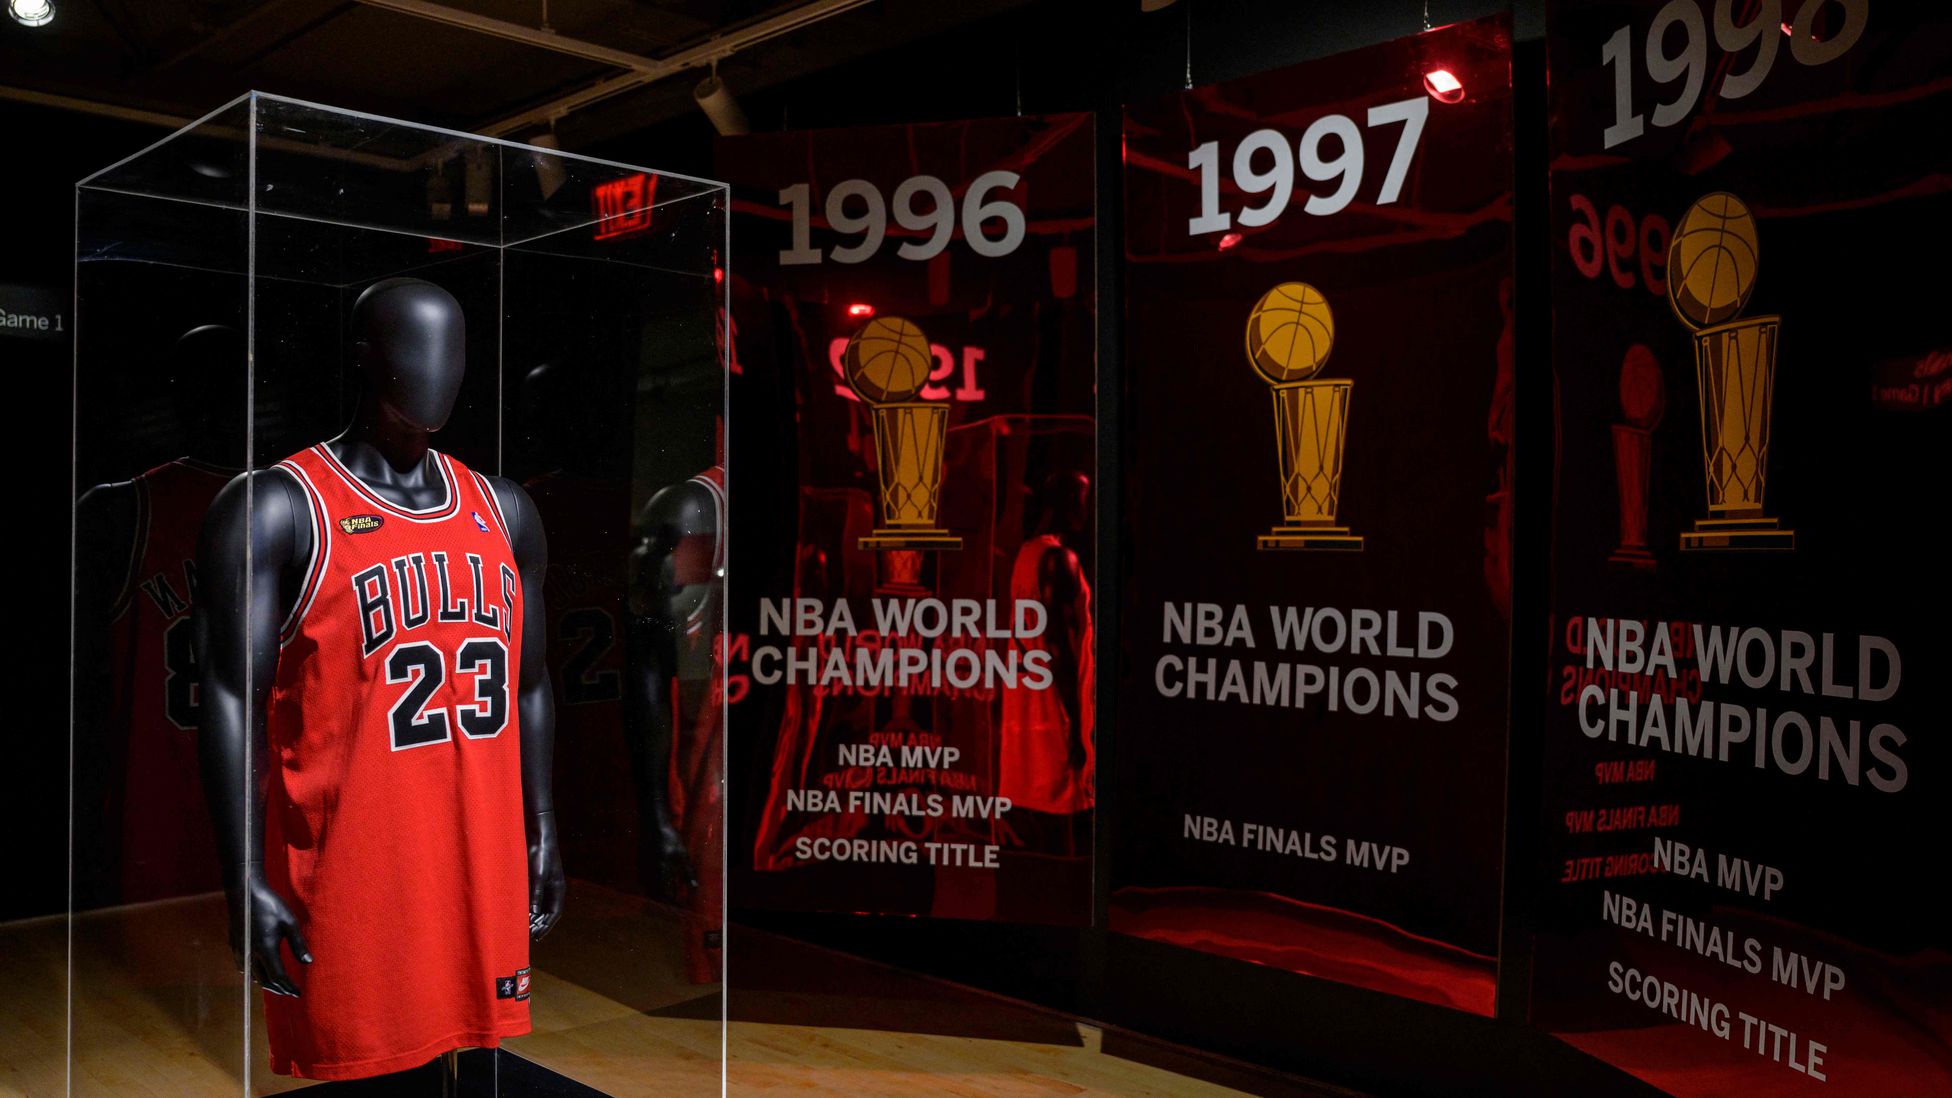 A Michael Jordan jersey is sold for over $10 million